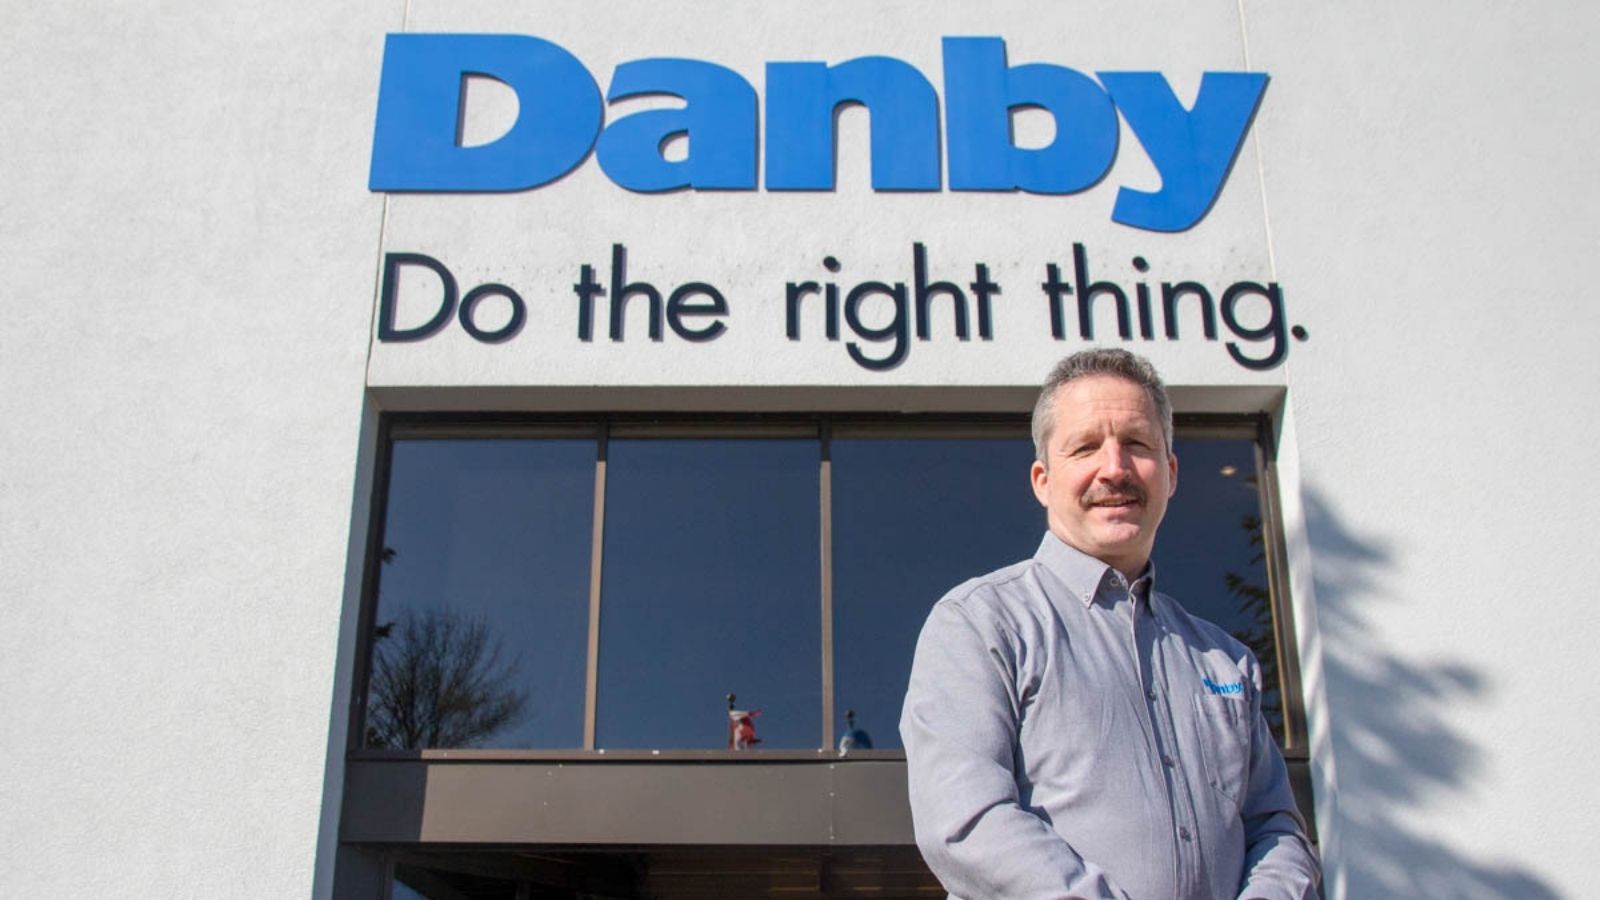 Jim Estill of Danby Appliances: How To Successfully Ride The Emotional Highs & Lows Of Being An Entrepreneur